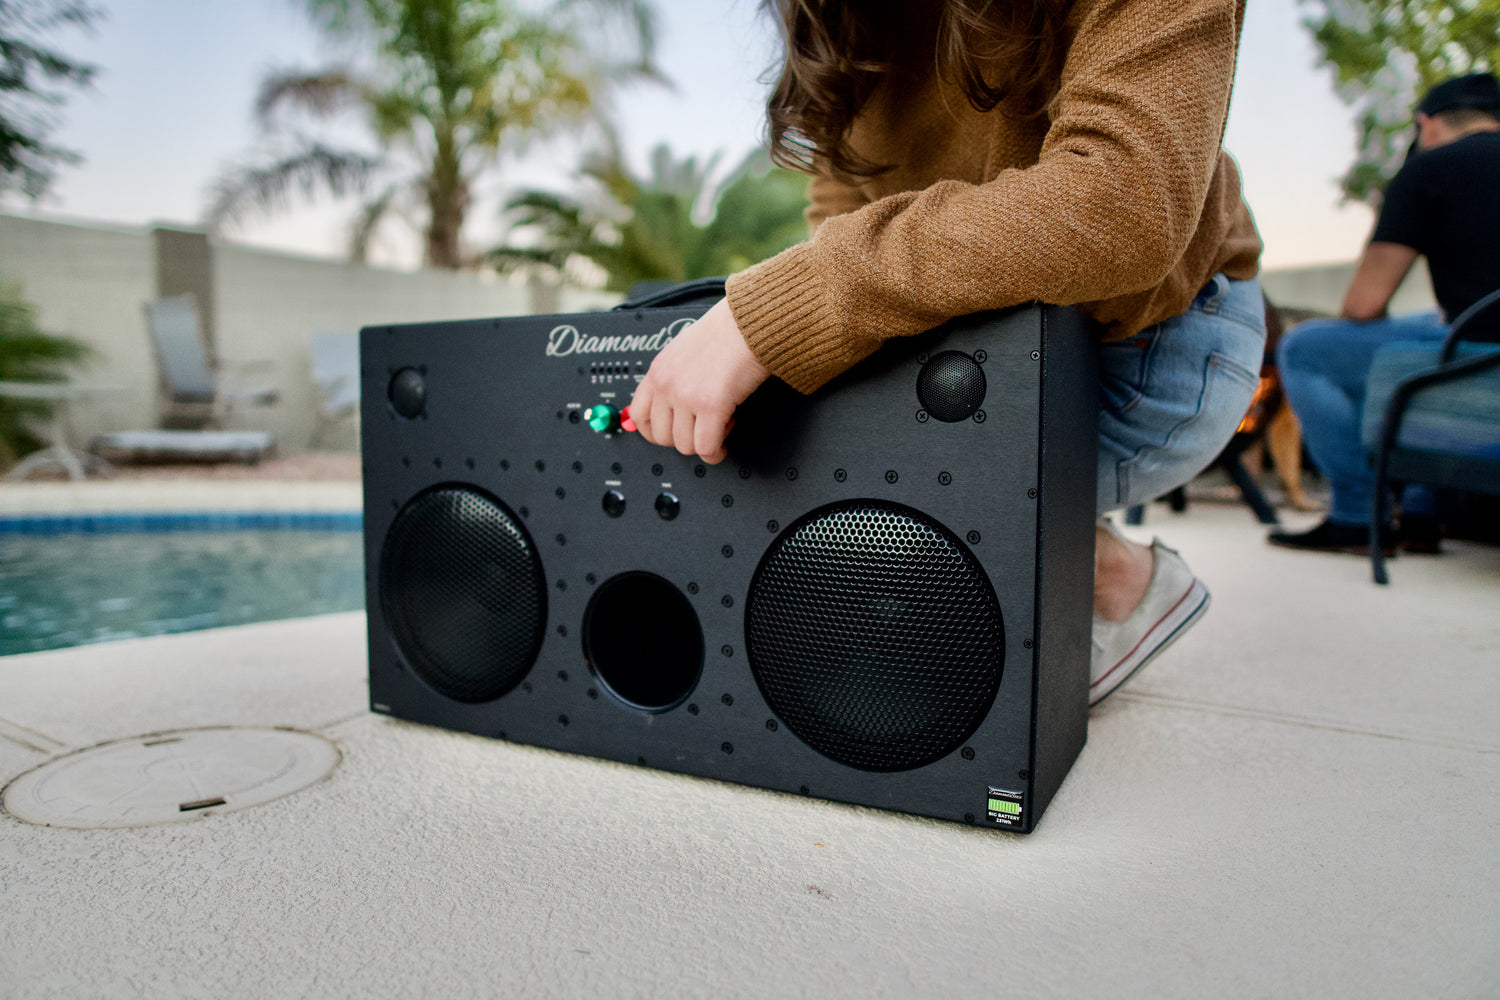 front angled view of L3 speaker black with red and green knobs next to pool with cropped person&